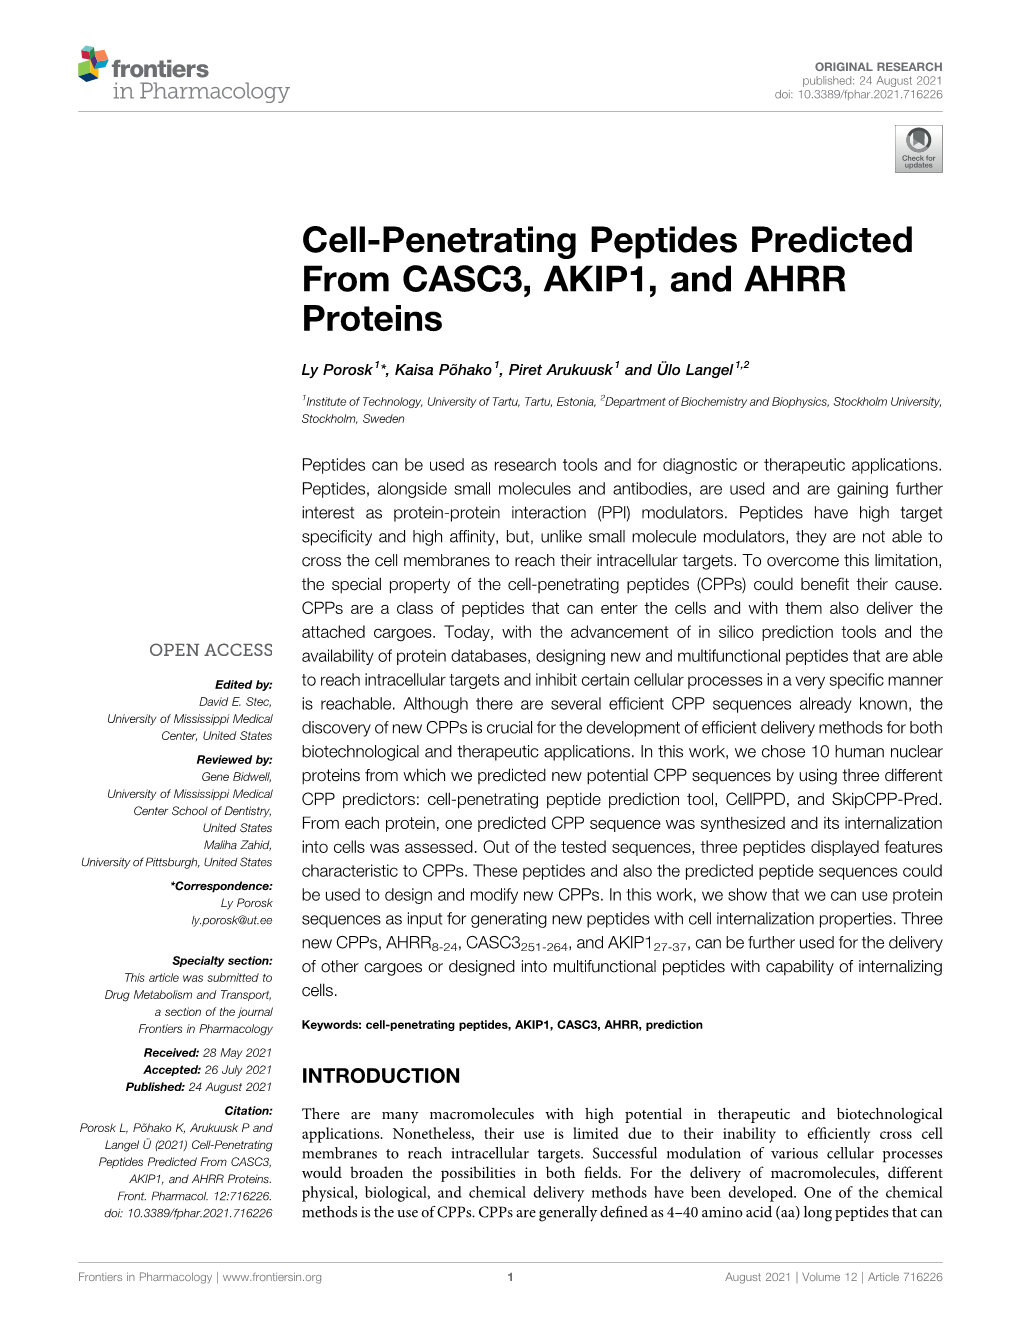 Cell-Penetrating Peptides Predicted from CASC3, AKIP1, and AHRR Proteins